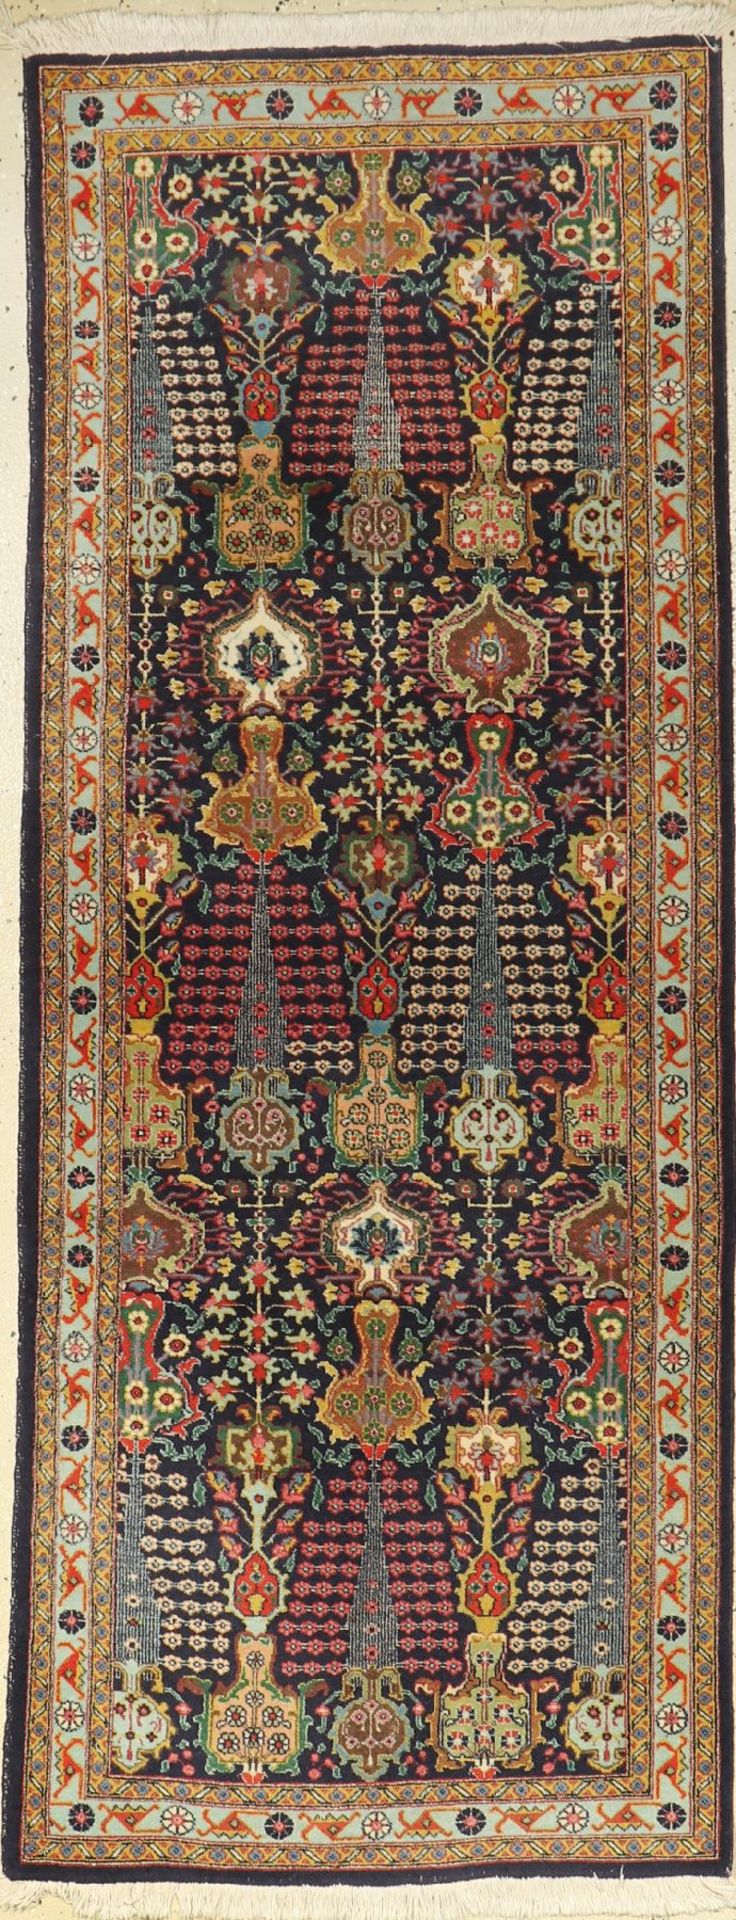 Tabriz alt, Persia, approx. 70 years, wool on cotton, approx. 192 x 73 cm, condition: 2. Auction: